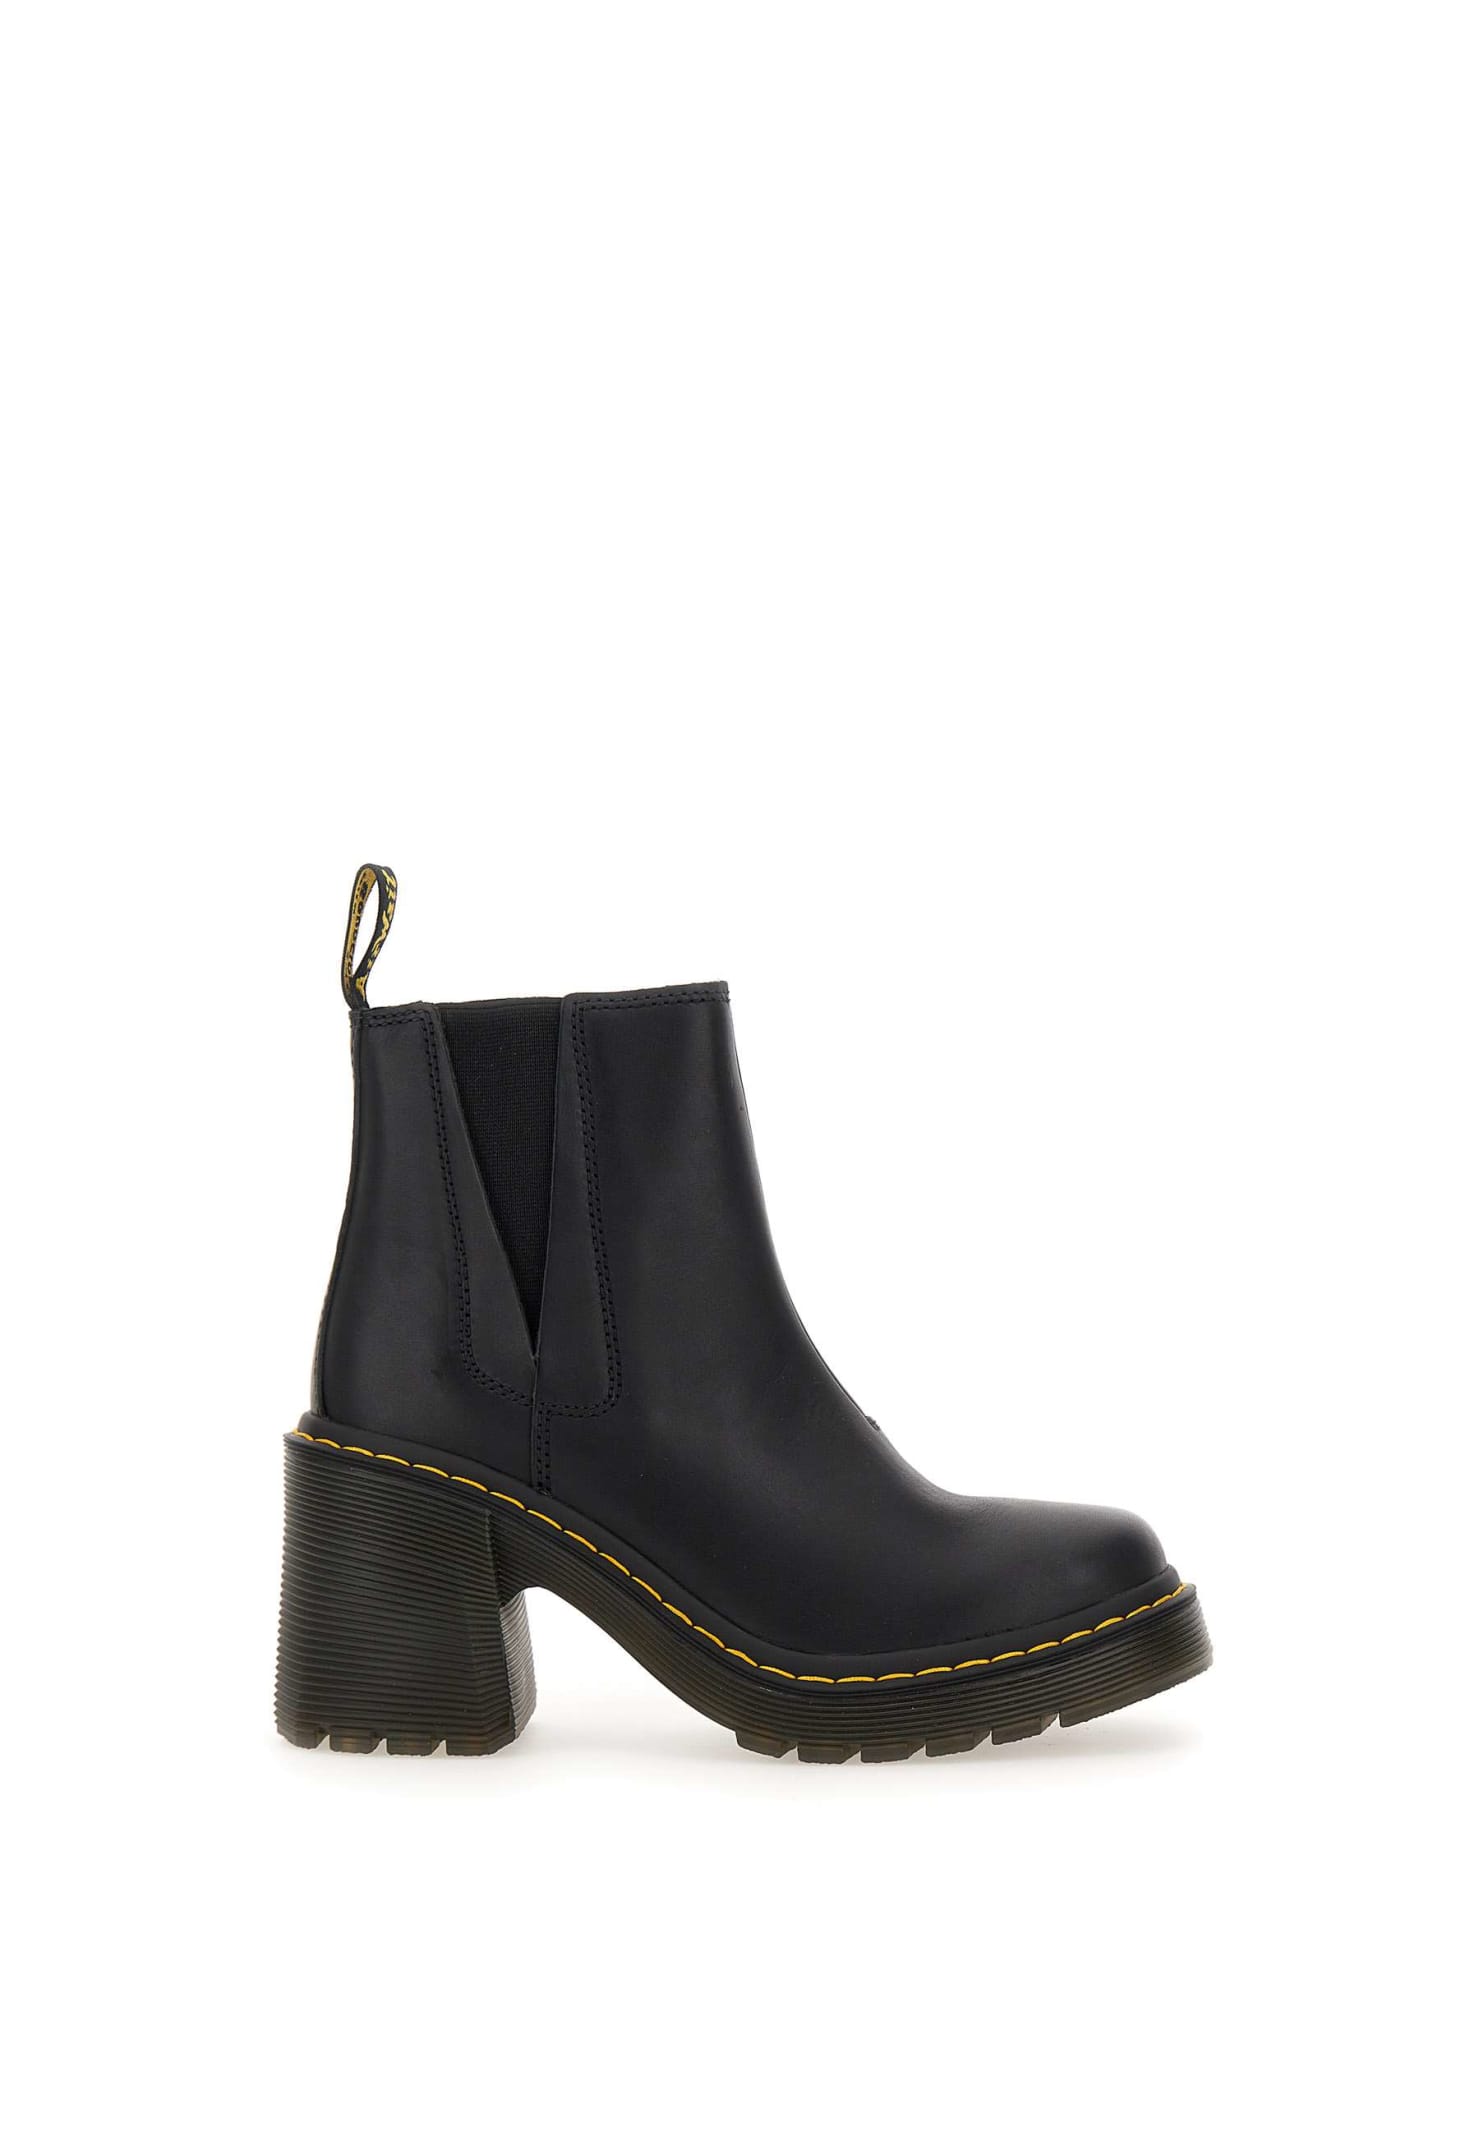 Dr. Martens spence Leather Ankle Boots